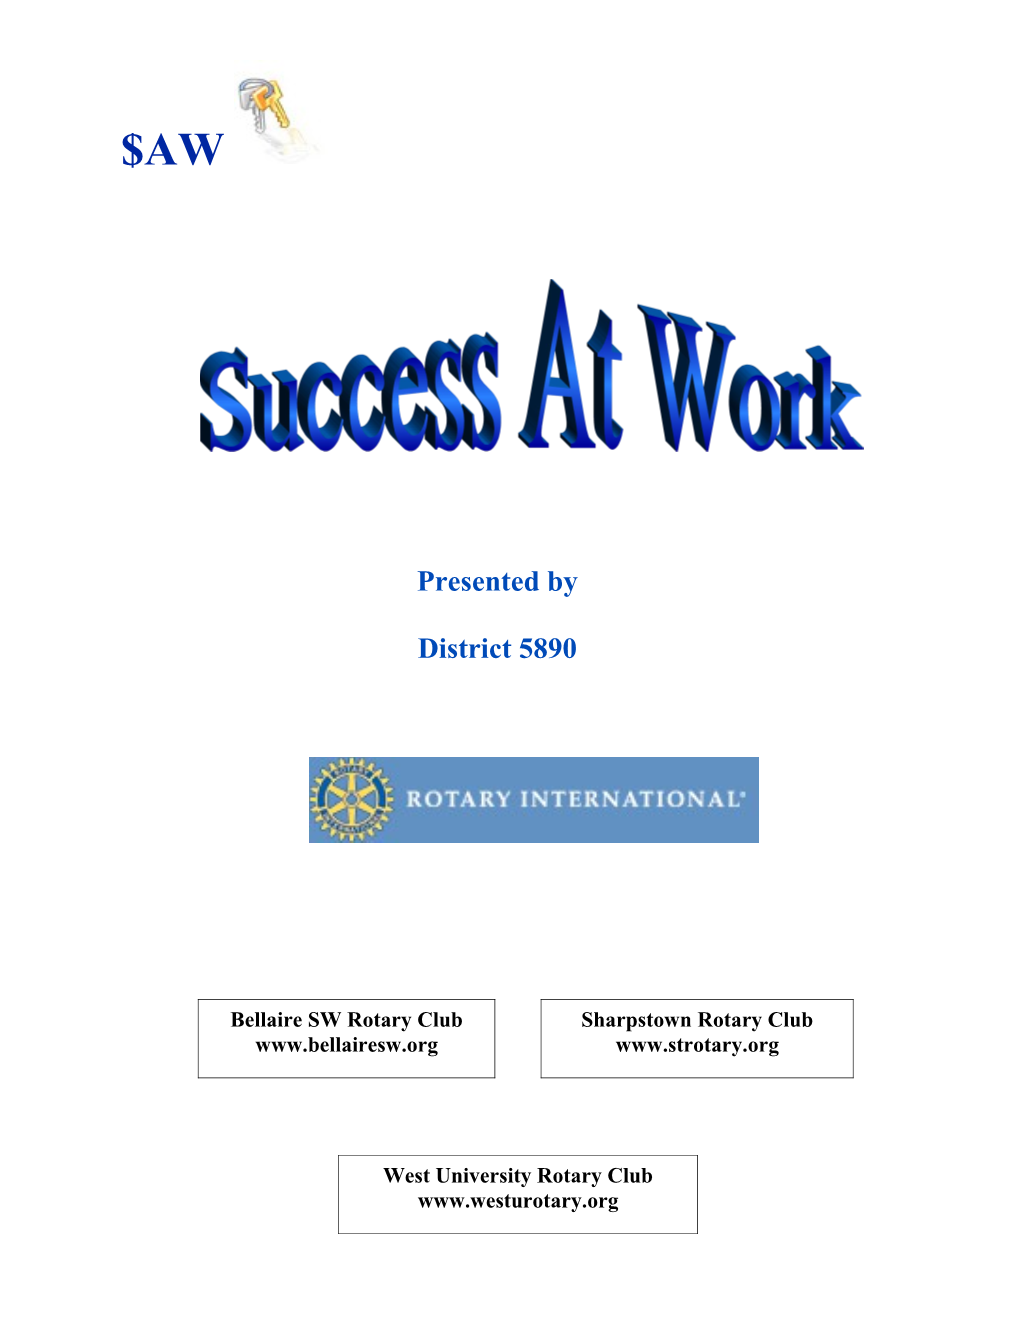 The Goal of the Success at Work Program ($AW) Is to Prepare Middle and High School Students